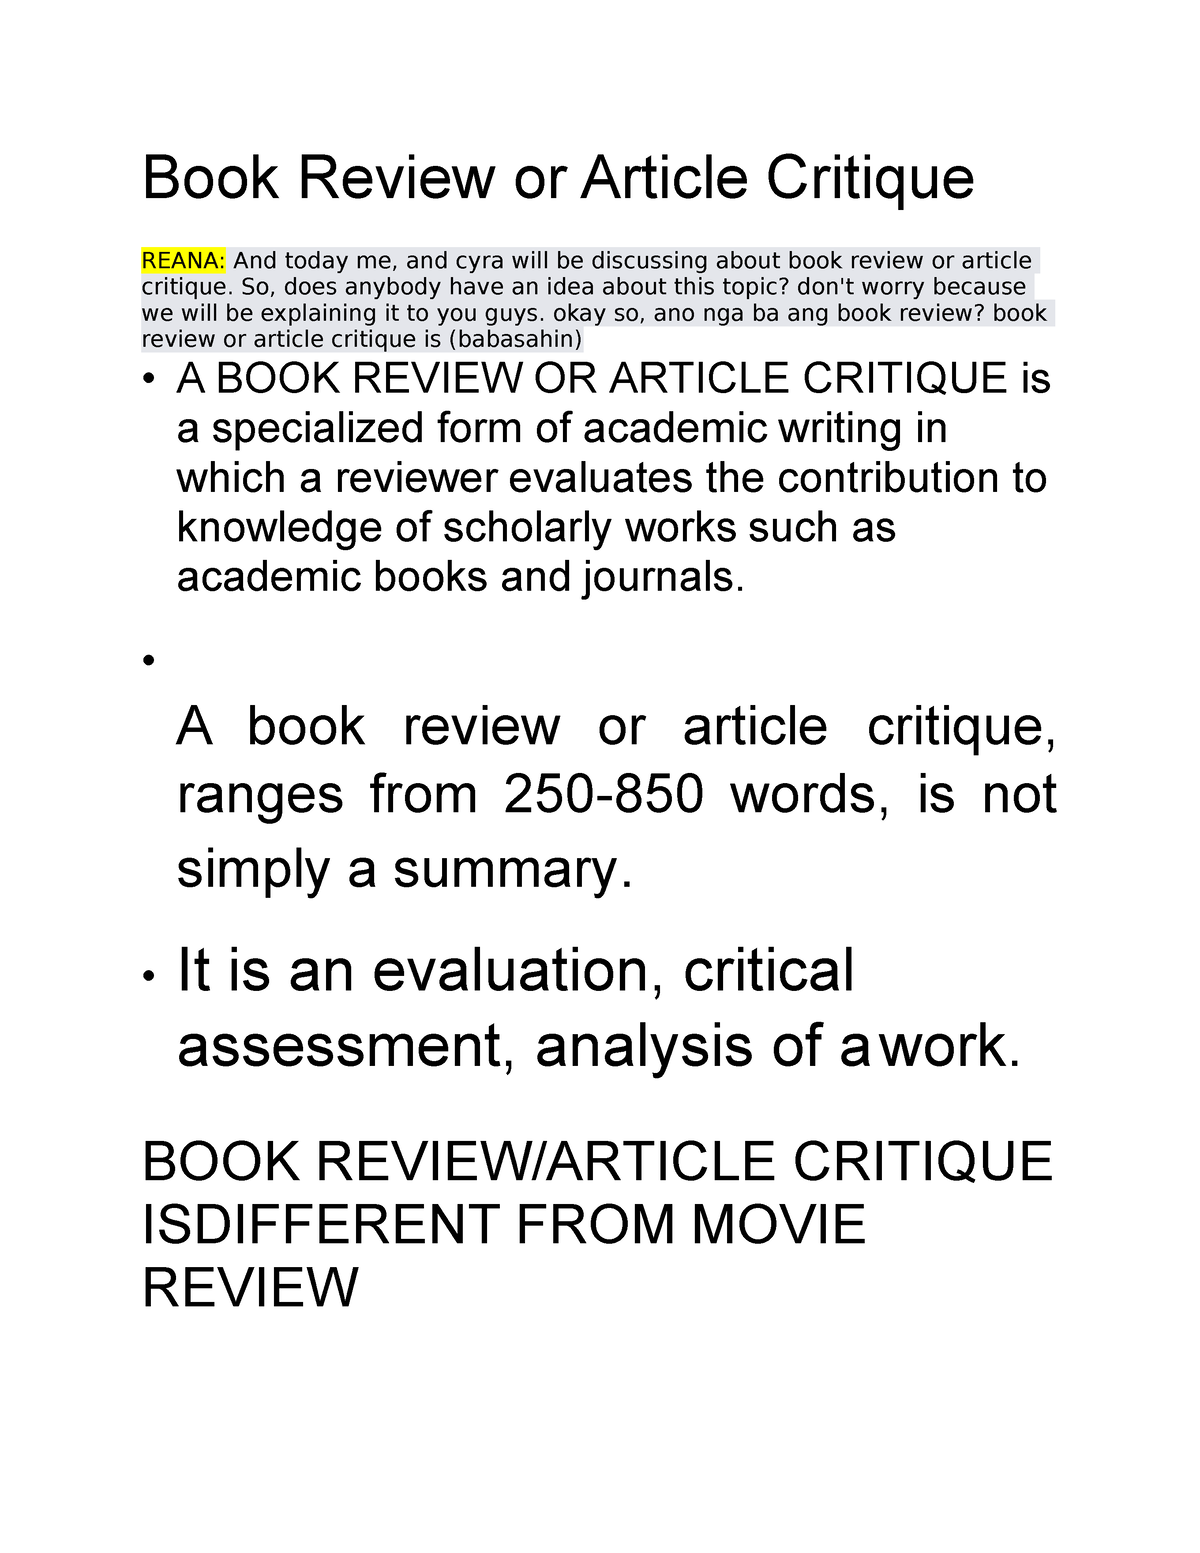 difference between book review and article critique